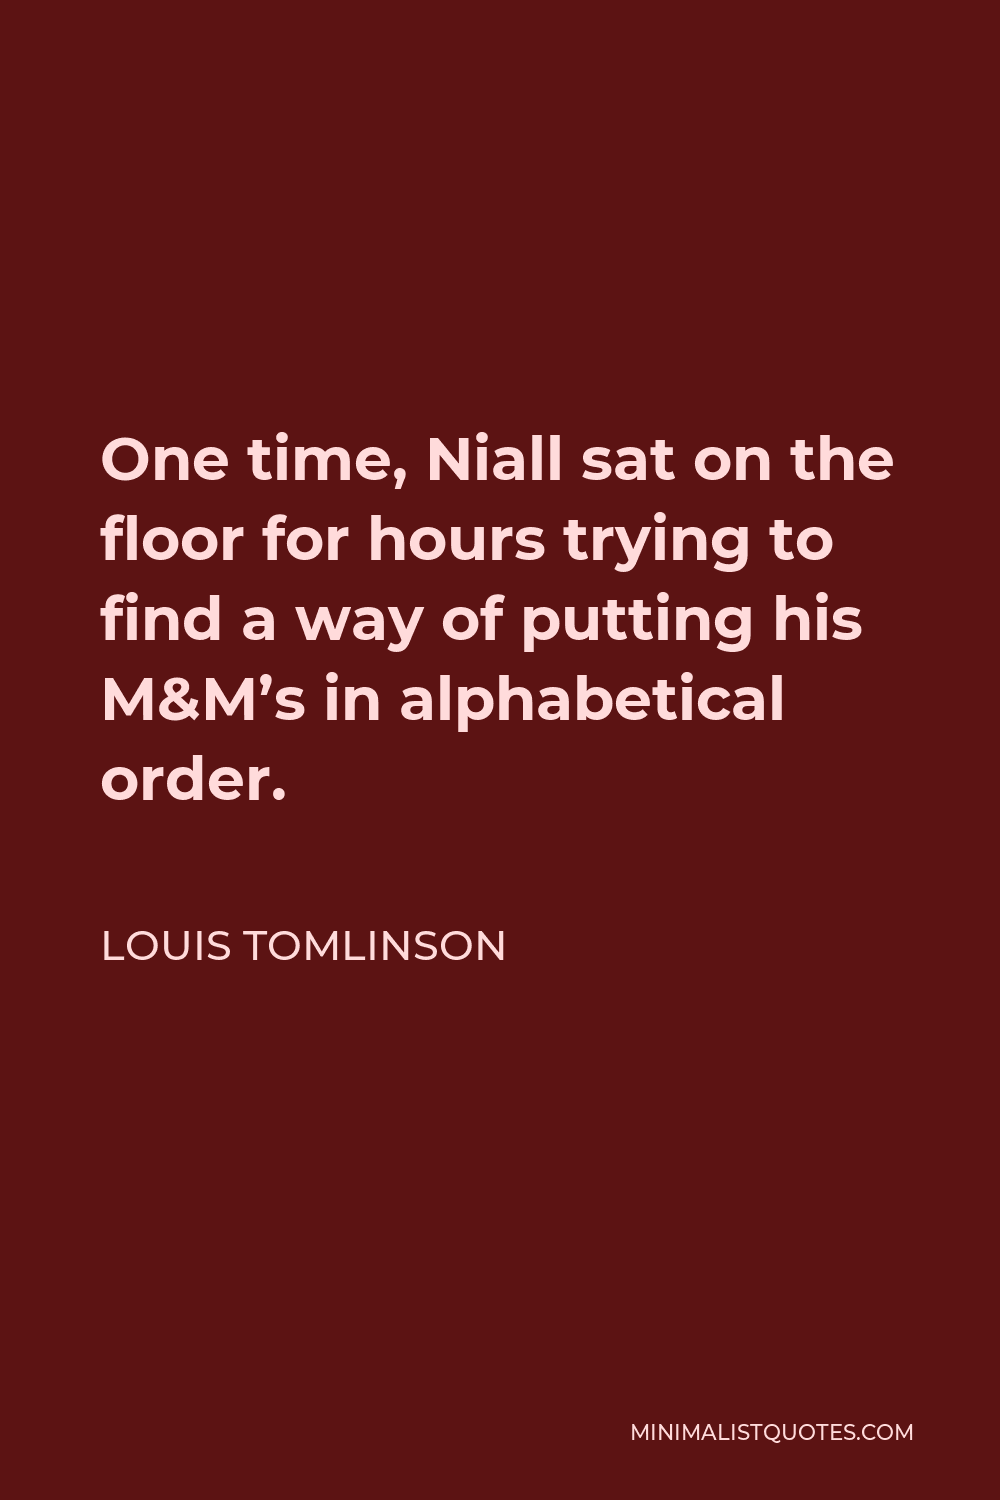 Louis Tomlinson Quote - One time, Niall sat on the floor for hours trying to find a way of putting his M&M’s in alphabetical order.